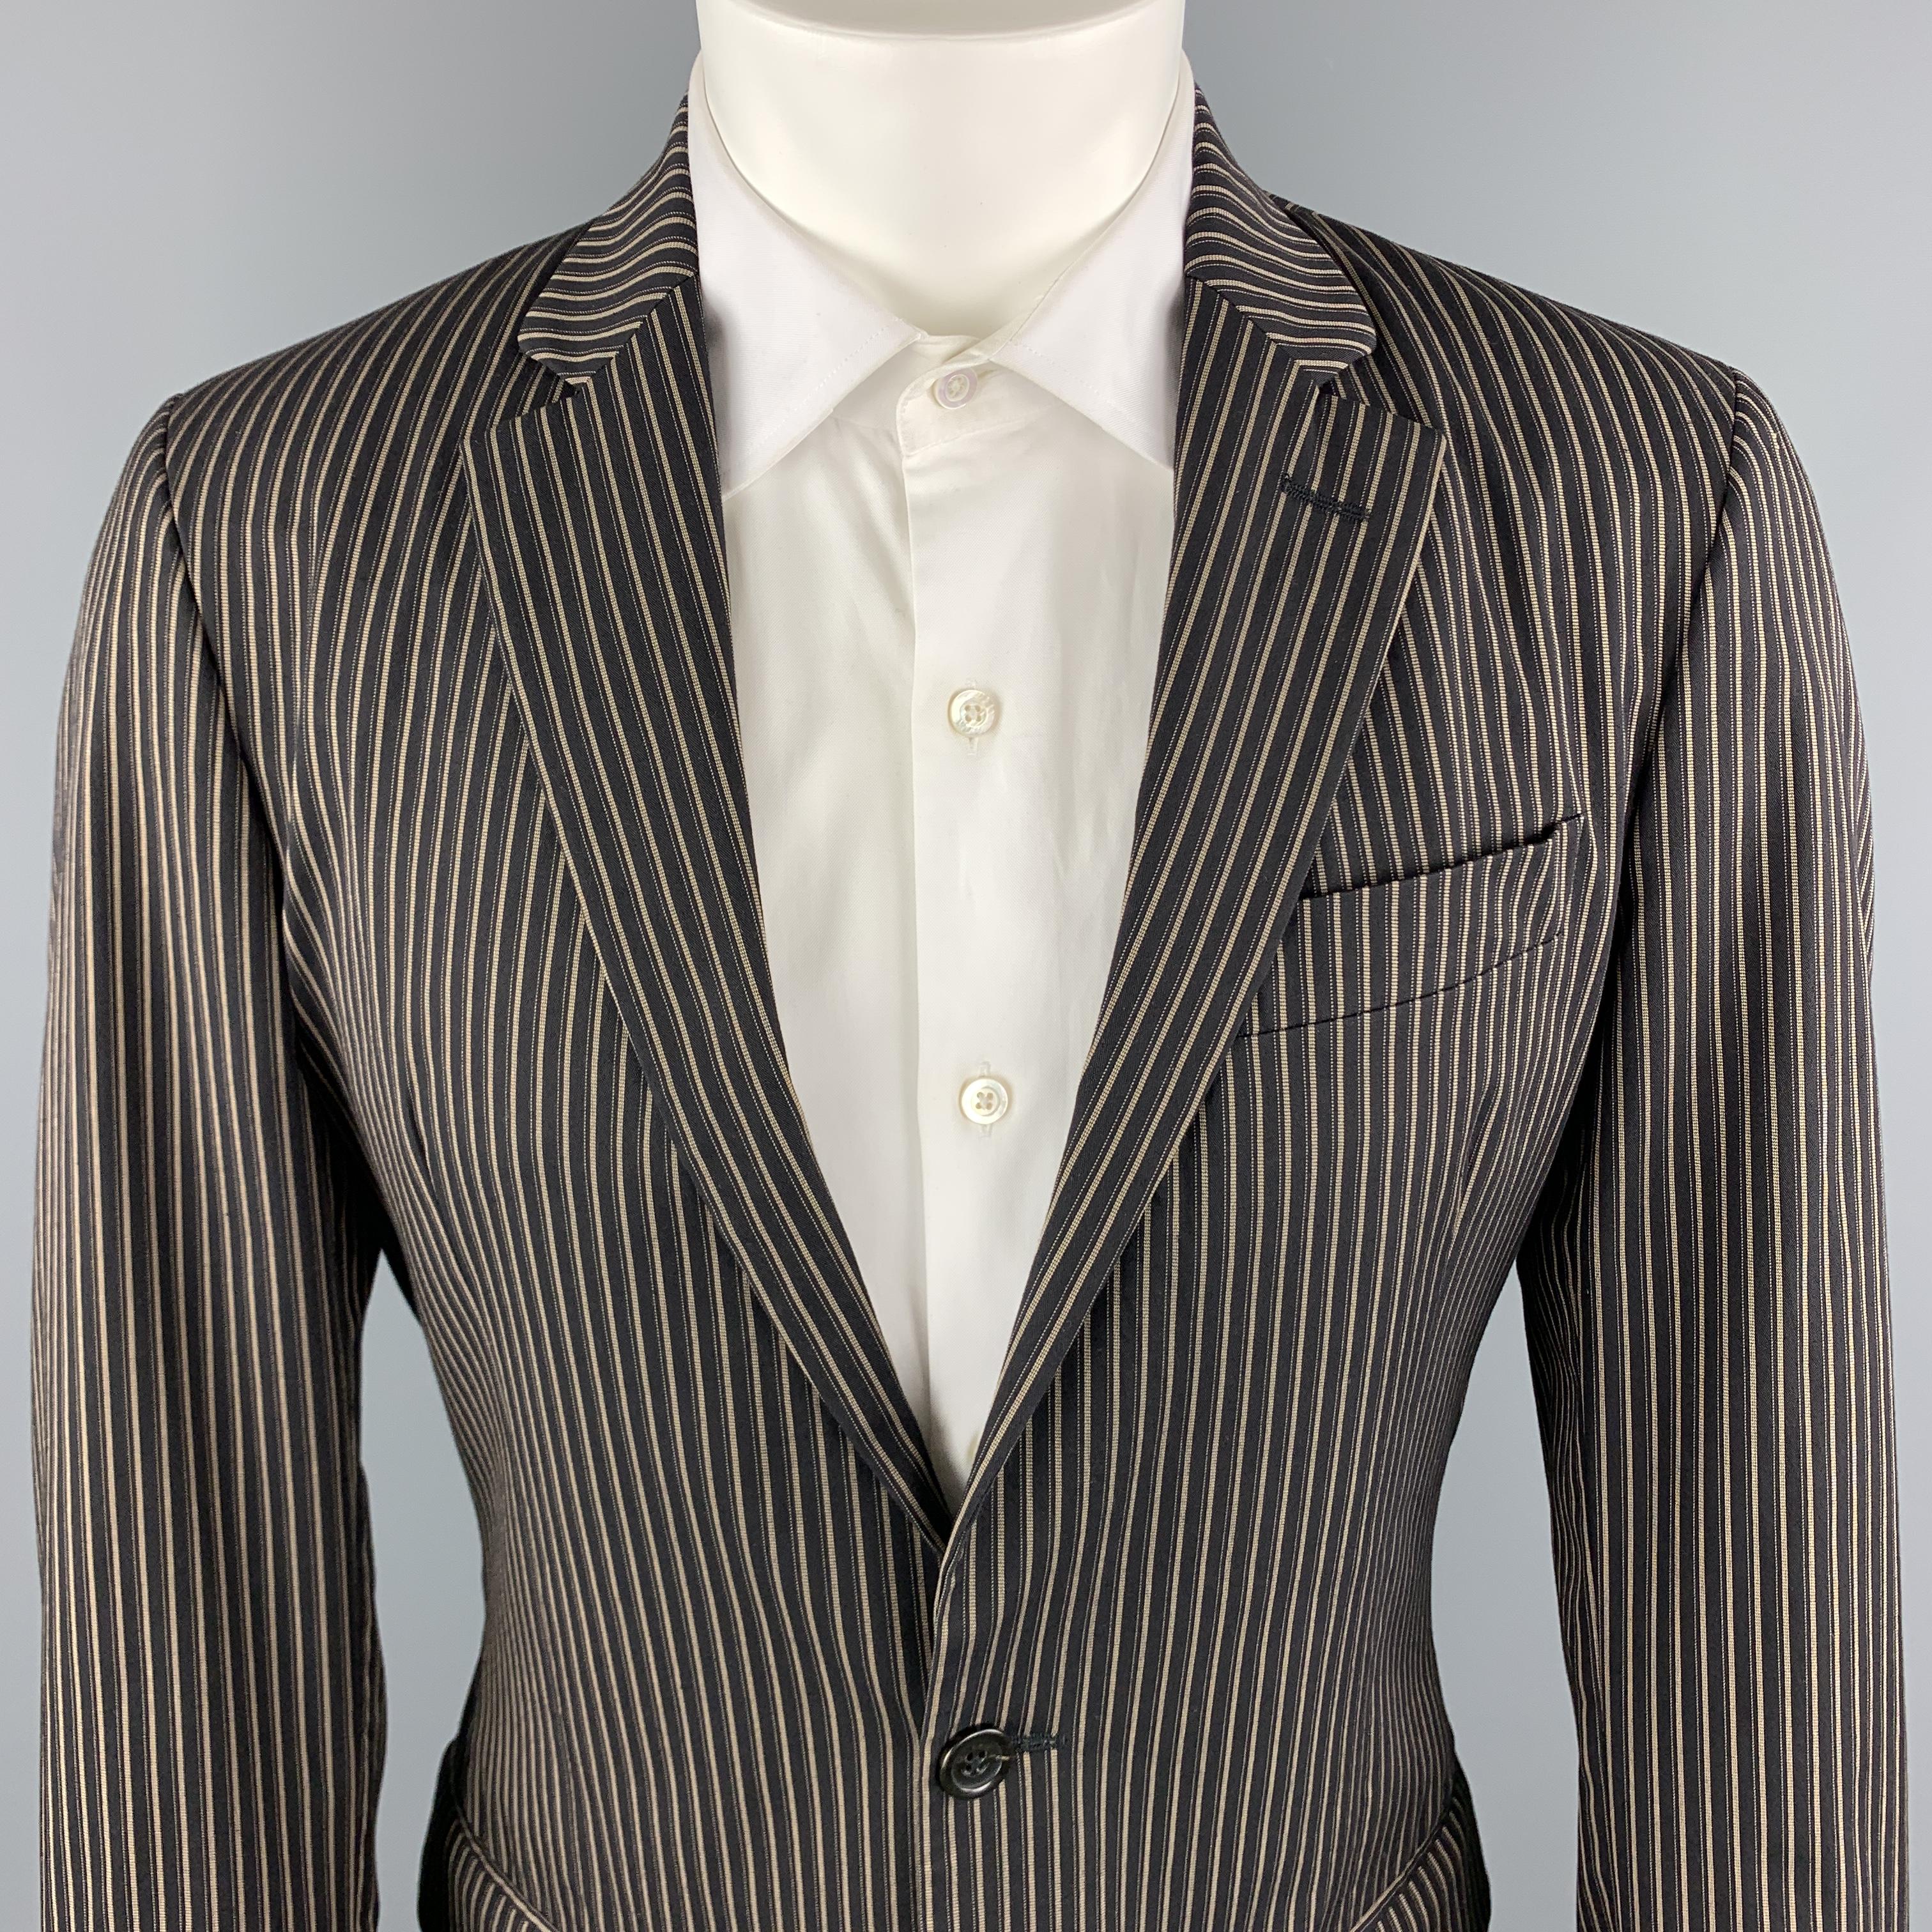 JUST CAVALLI Suit comes in a brown stripe cotton blend material, and includes a single breasted sport coat with a notch lapel and two button front, featuring an animal print lining, with matching flat front trouser, zip fly. Made in